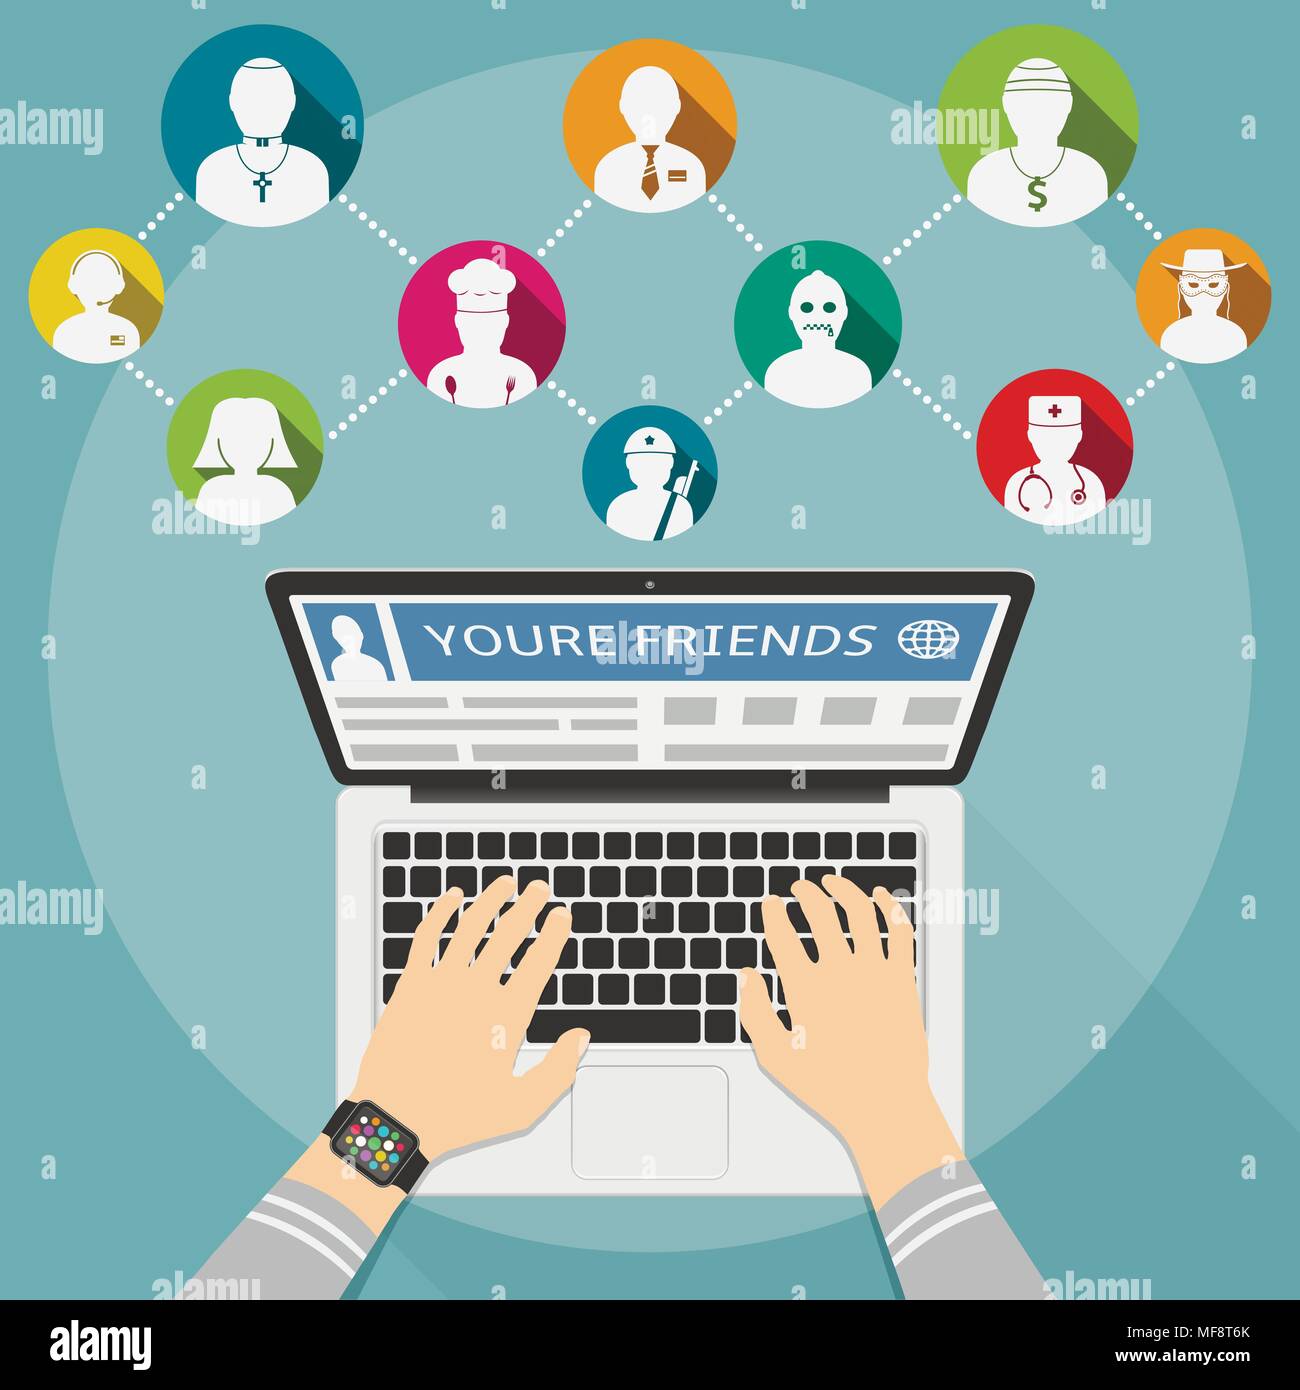 Friends in social networks. Flat design concept. Male hands type a message in social networks. Stock Vector